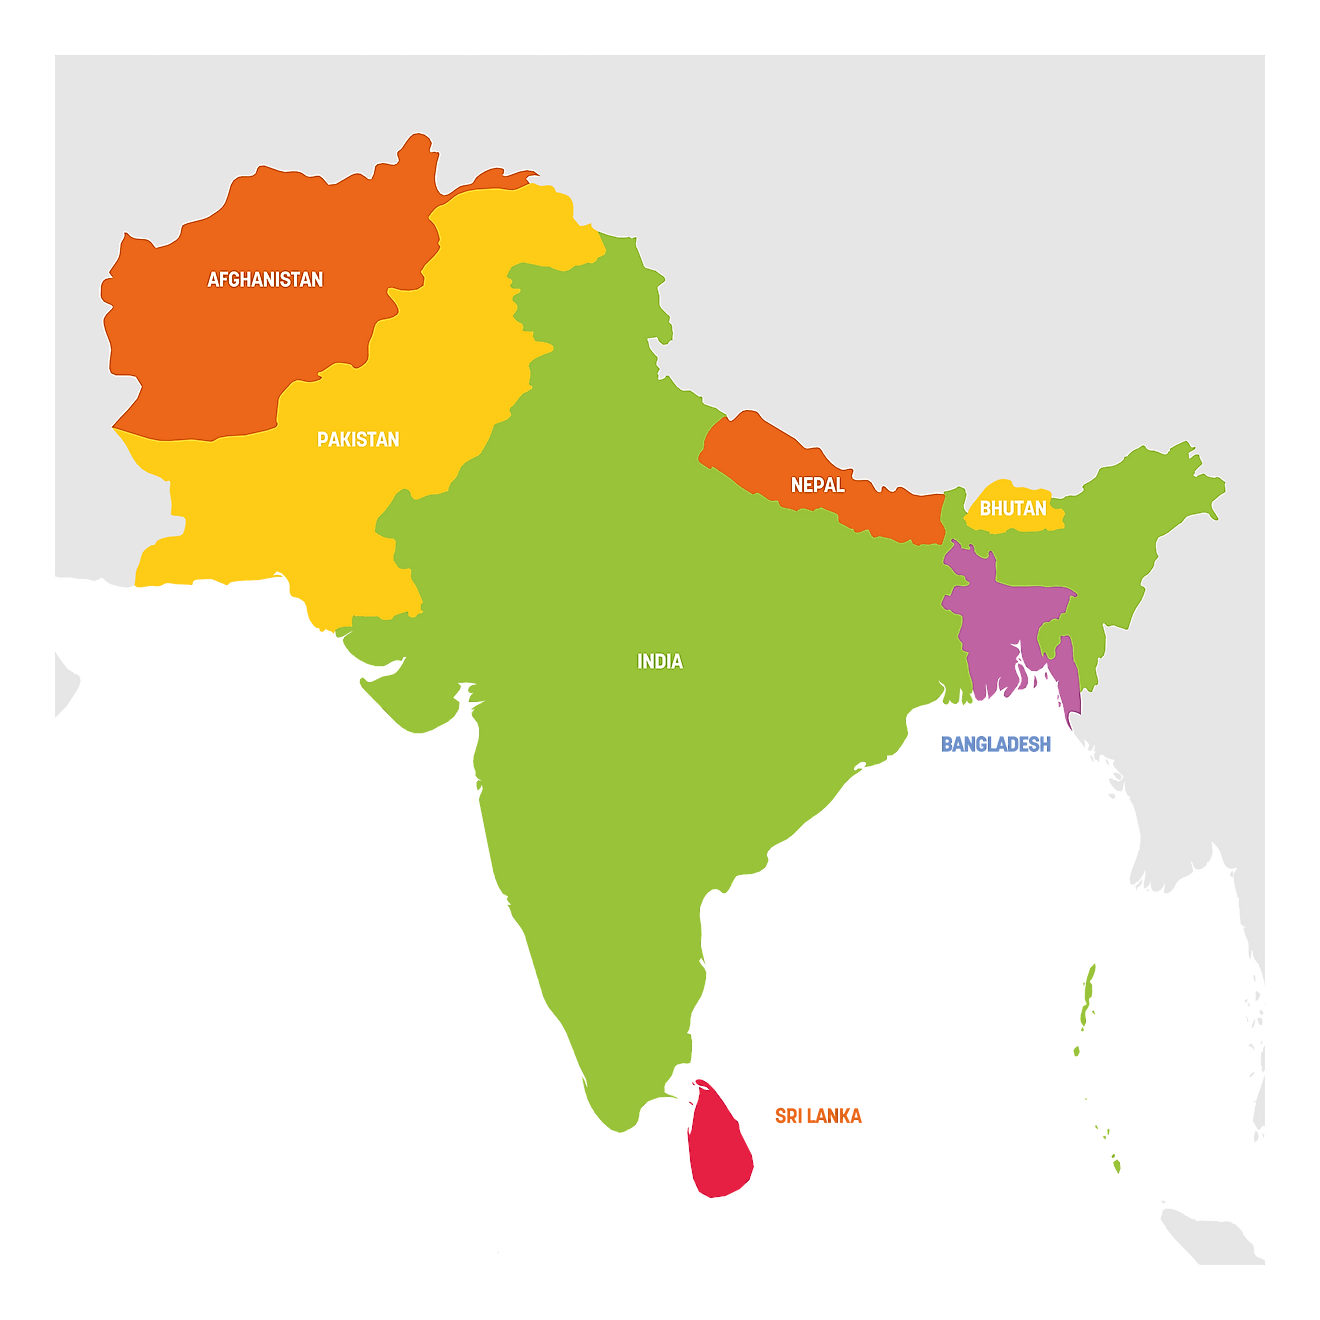 Map of the Indian subcontinent.